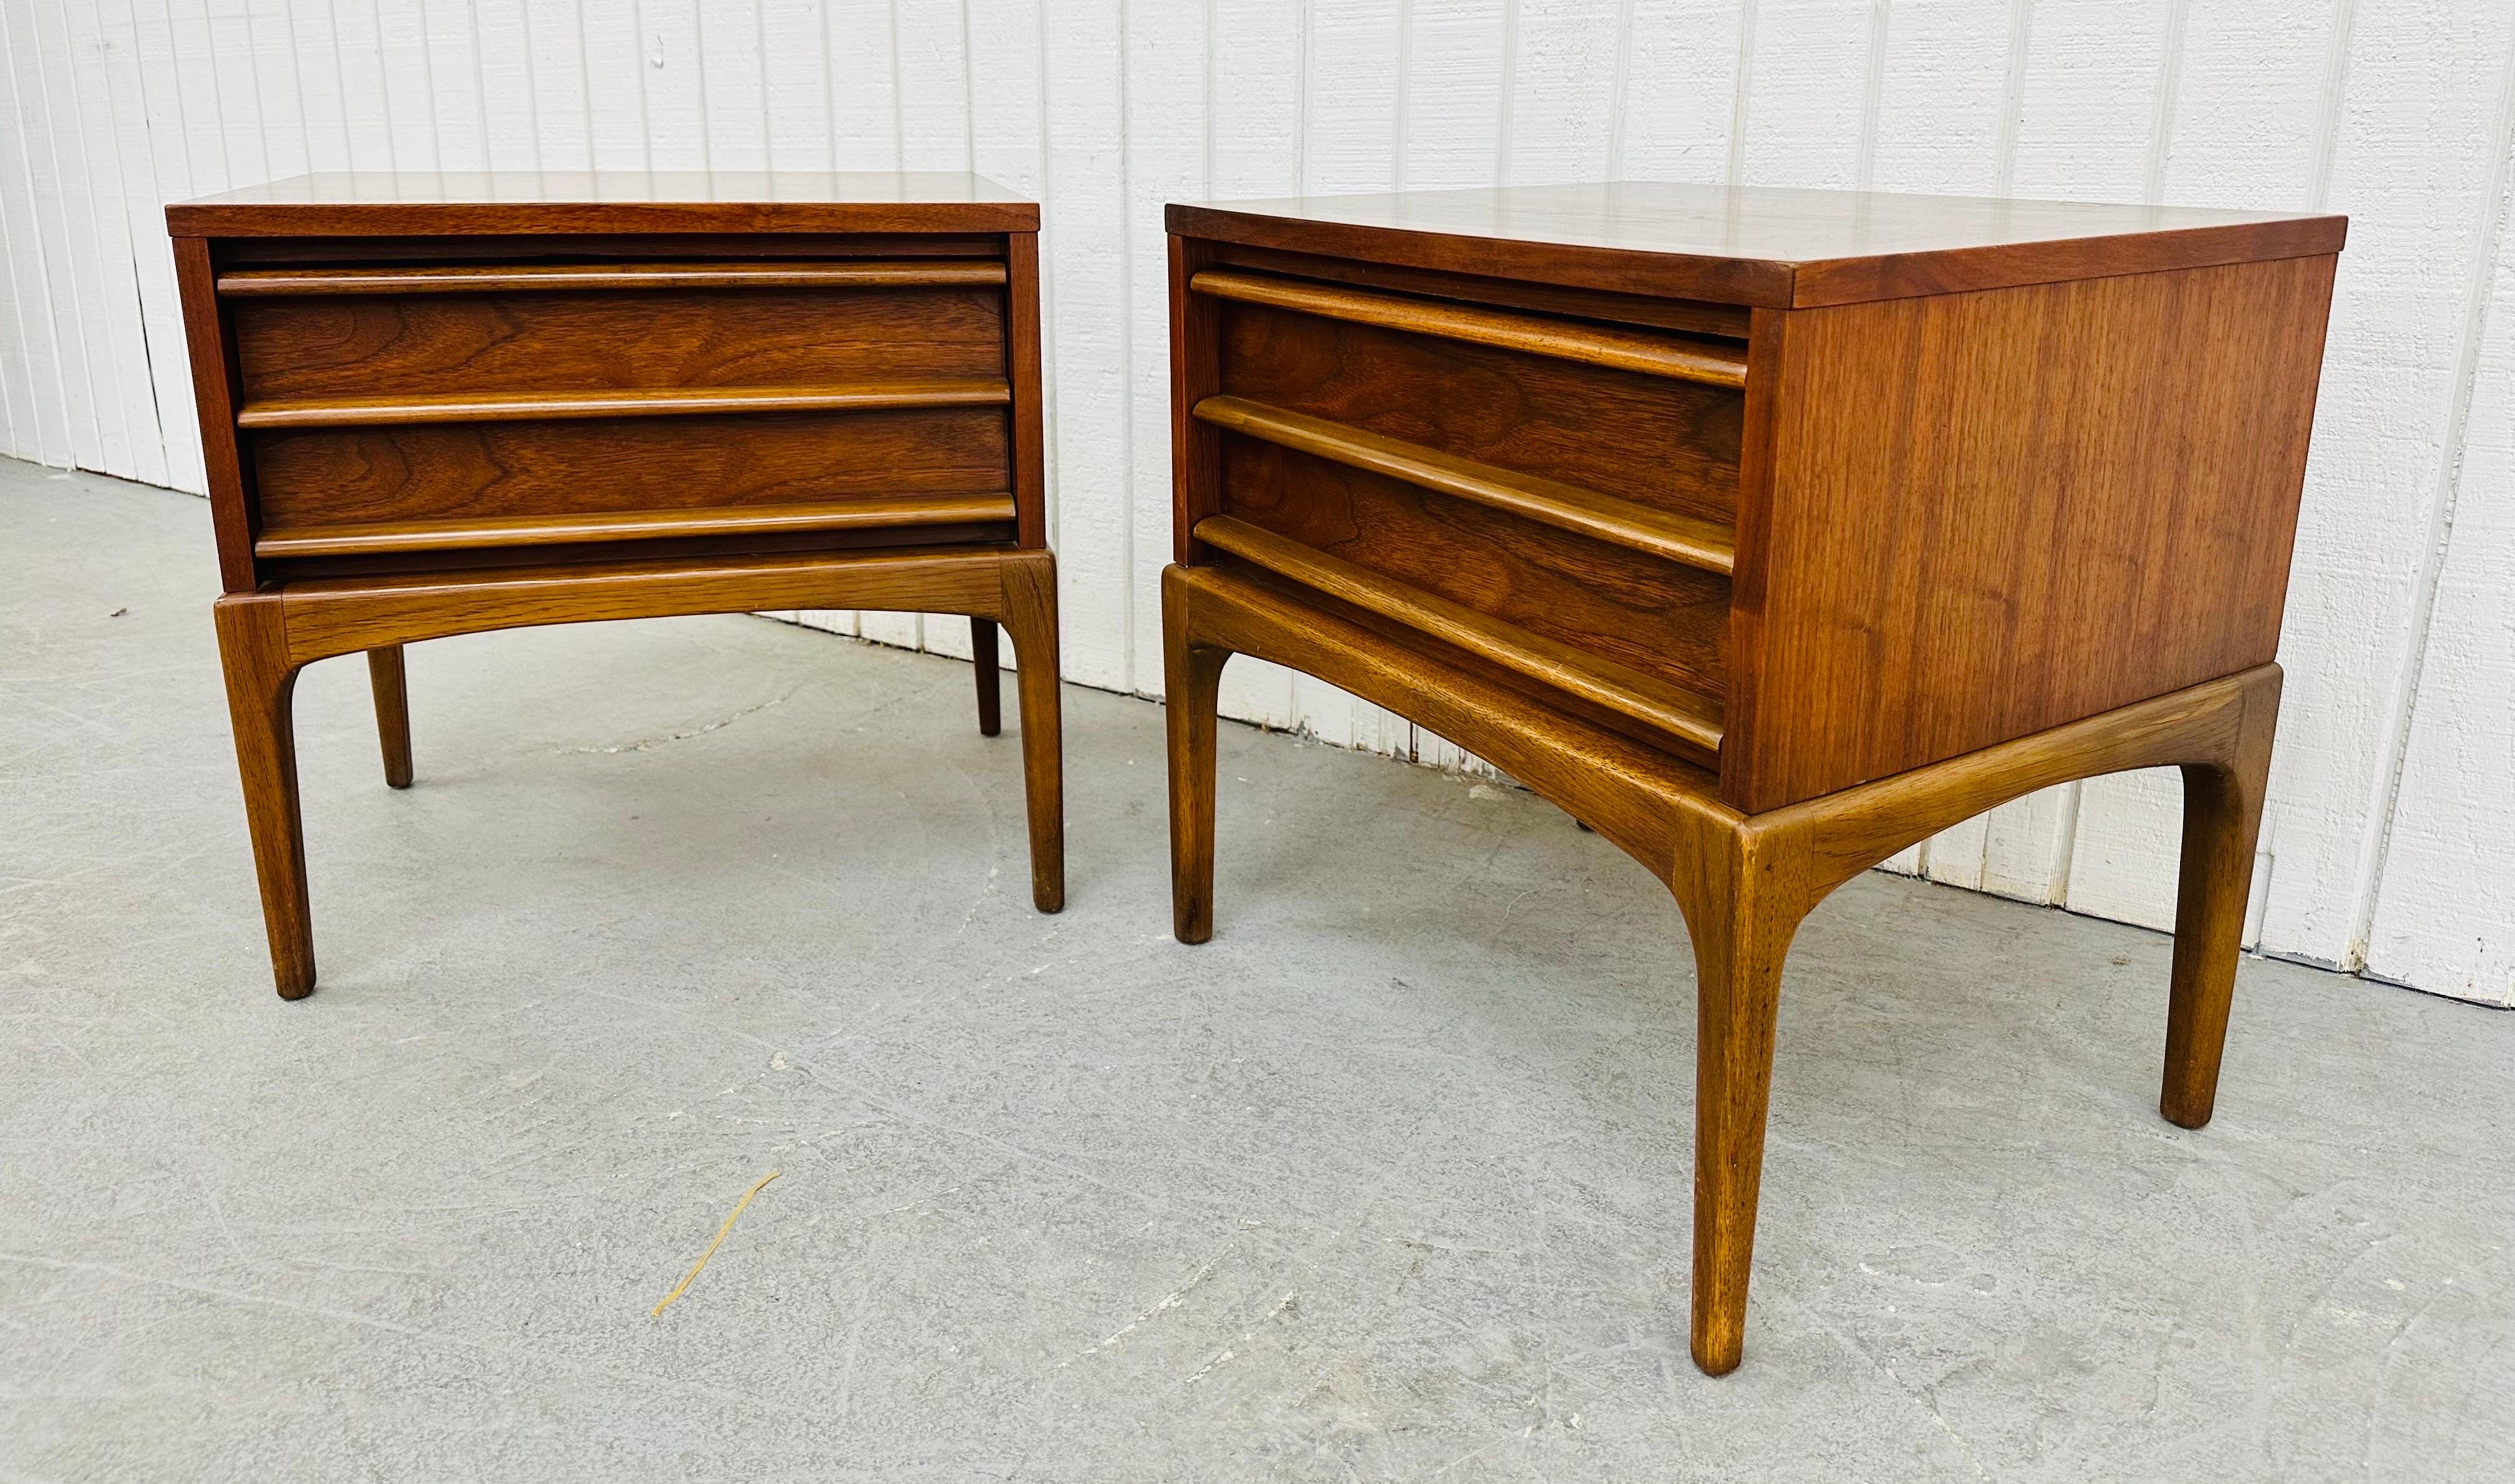 This listing is for a pair of Mid-Century Modern Lane Rhythm Walnut Nightstands. Featuring a straight line design, single drawer for storage, long modern legs, and a beautiful walnut finish. This is an exceptional combination of quality and design